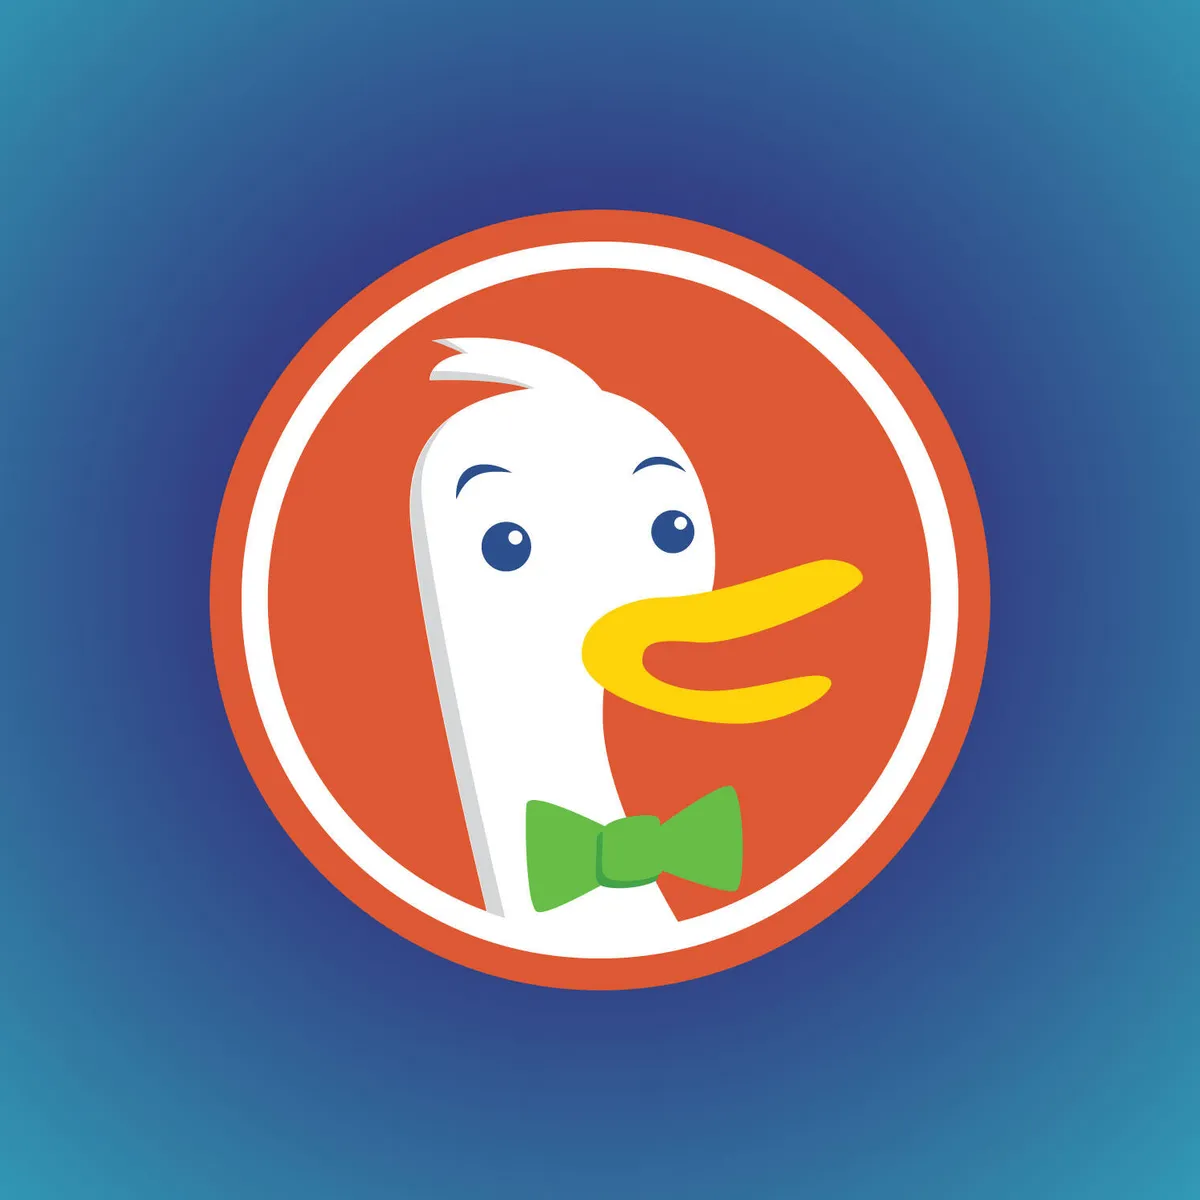 DuckDuckGo Dips Into the AI Chatbot Pond with DuckAssist